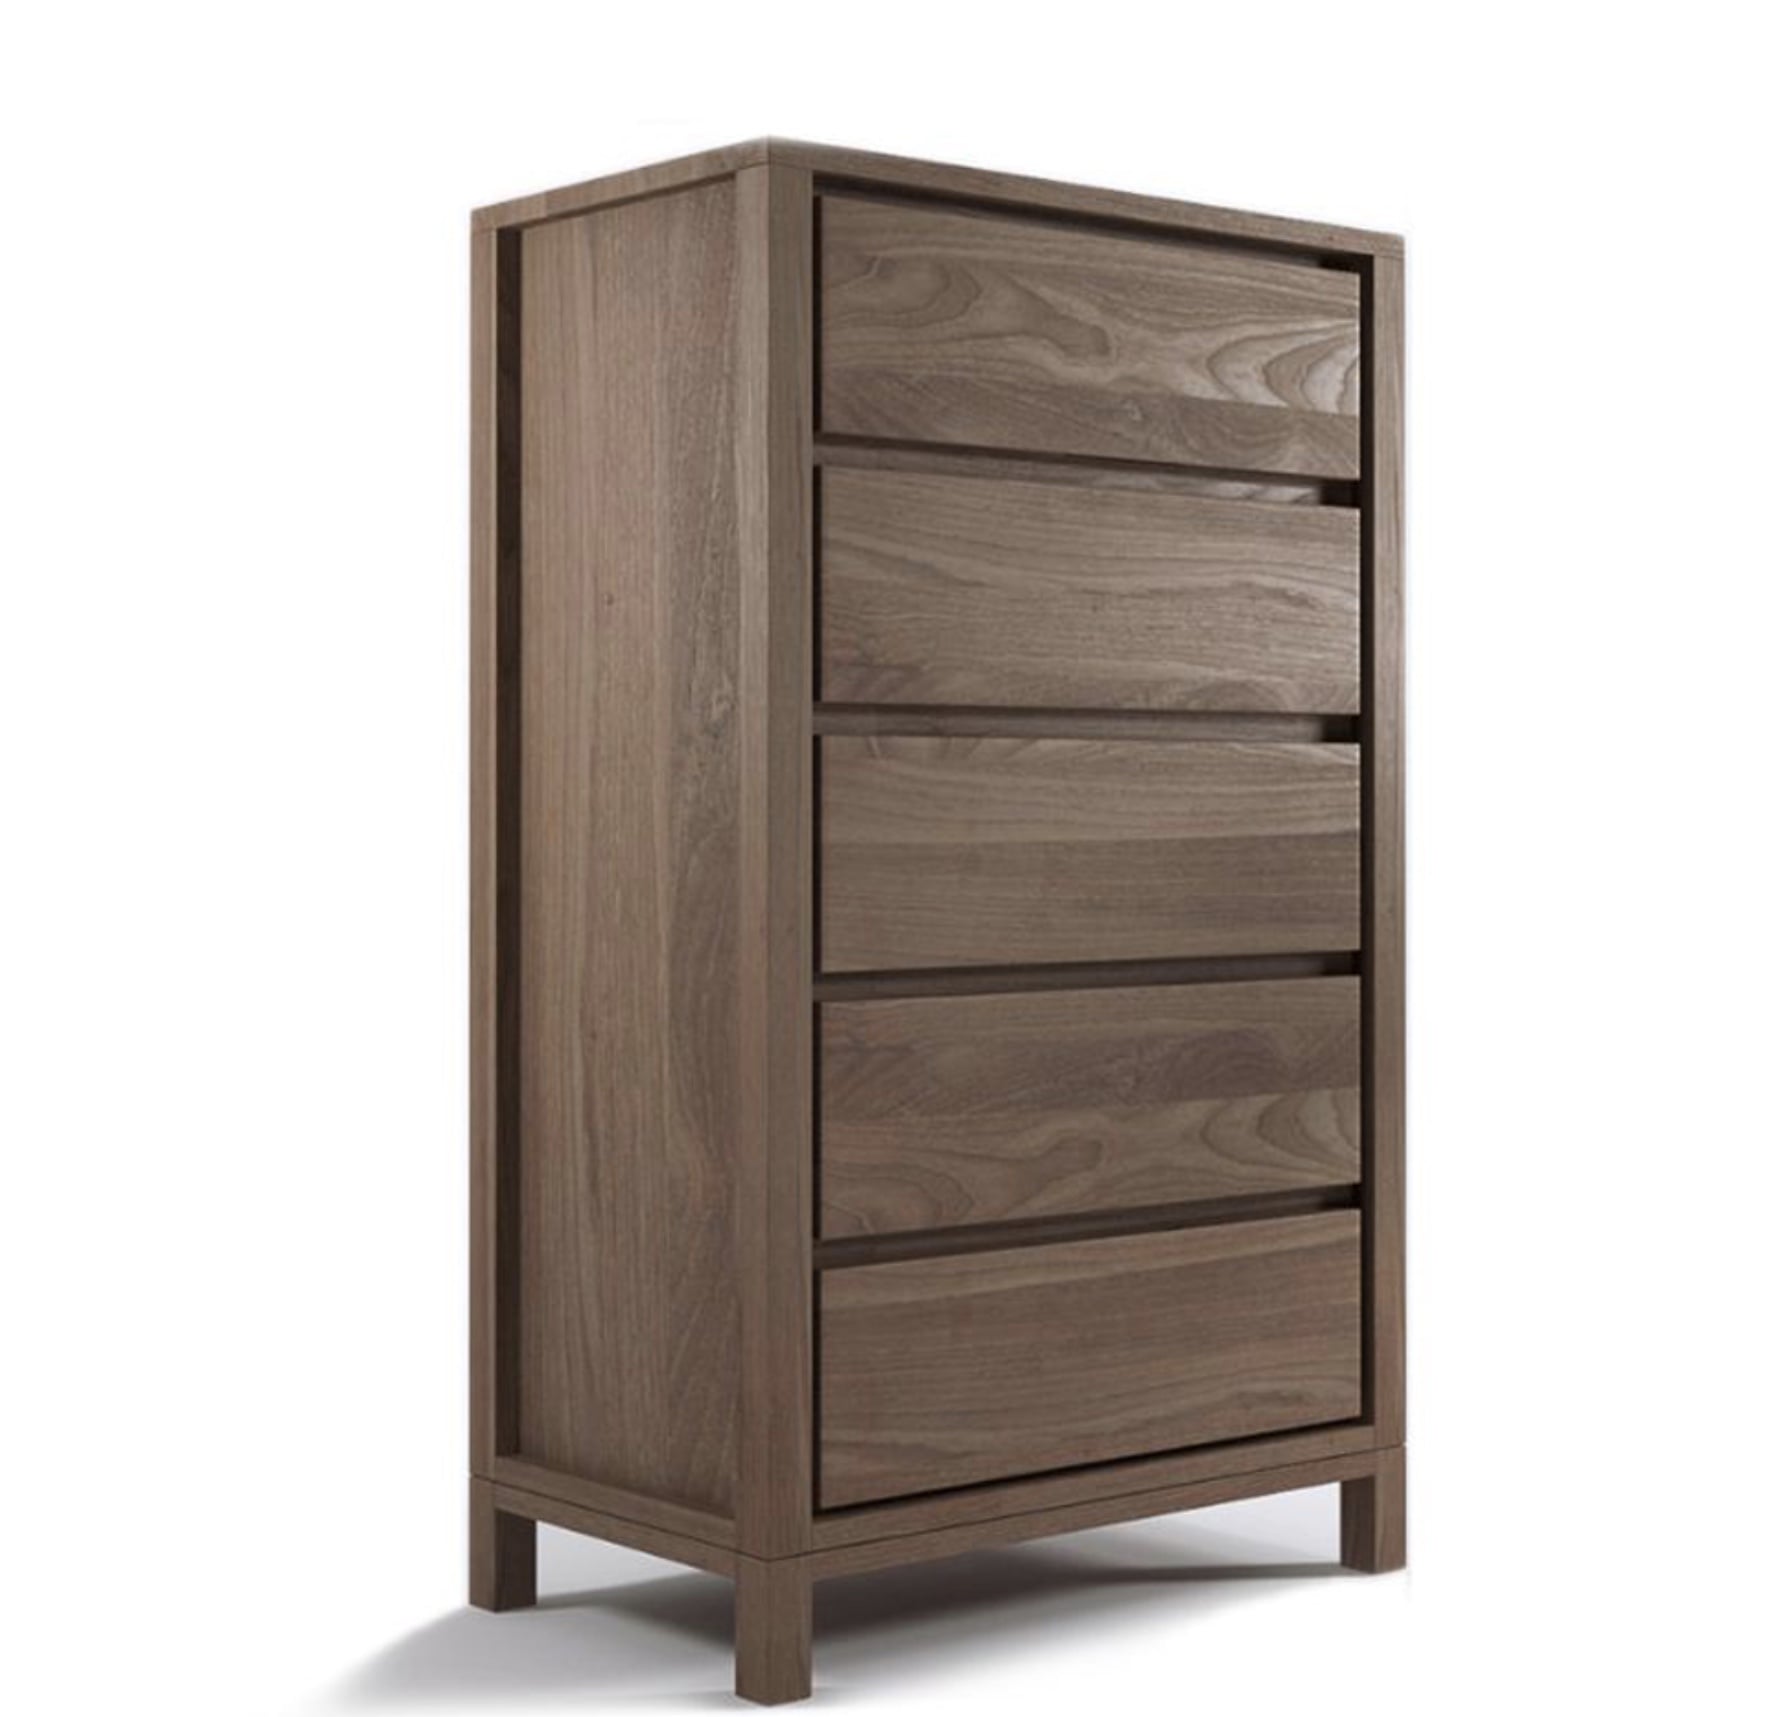 Made to Order Furniture : Cabinets - Cabs 104-01